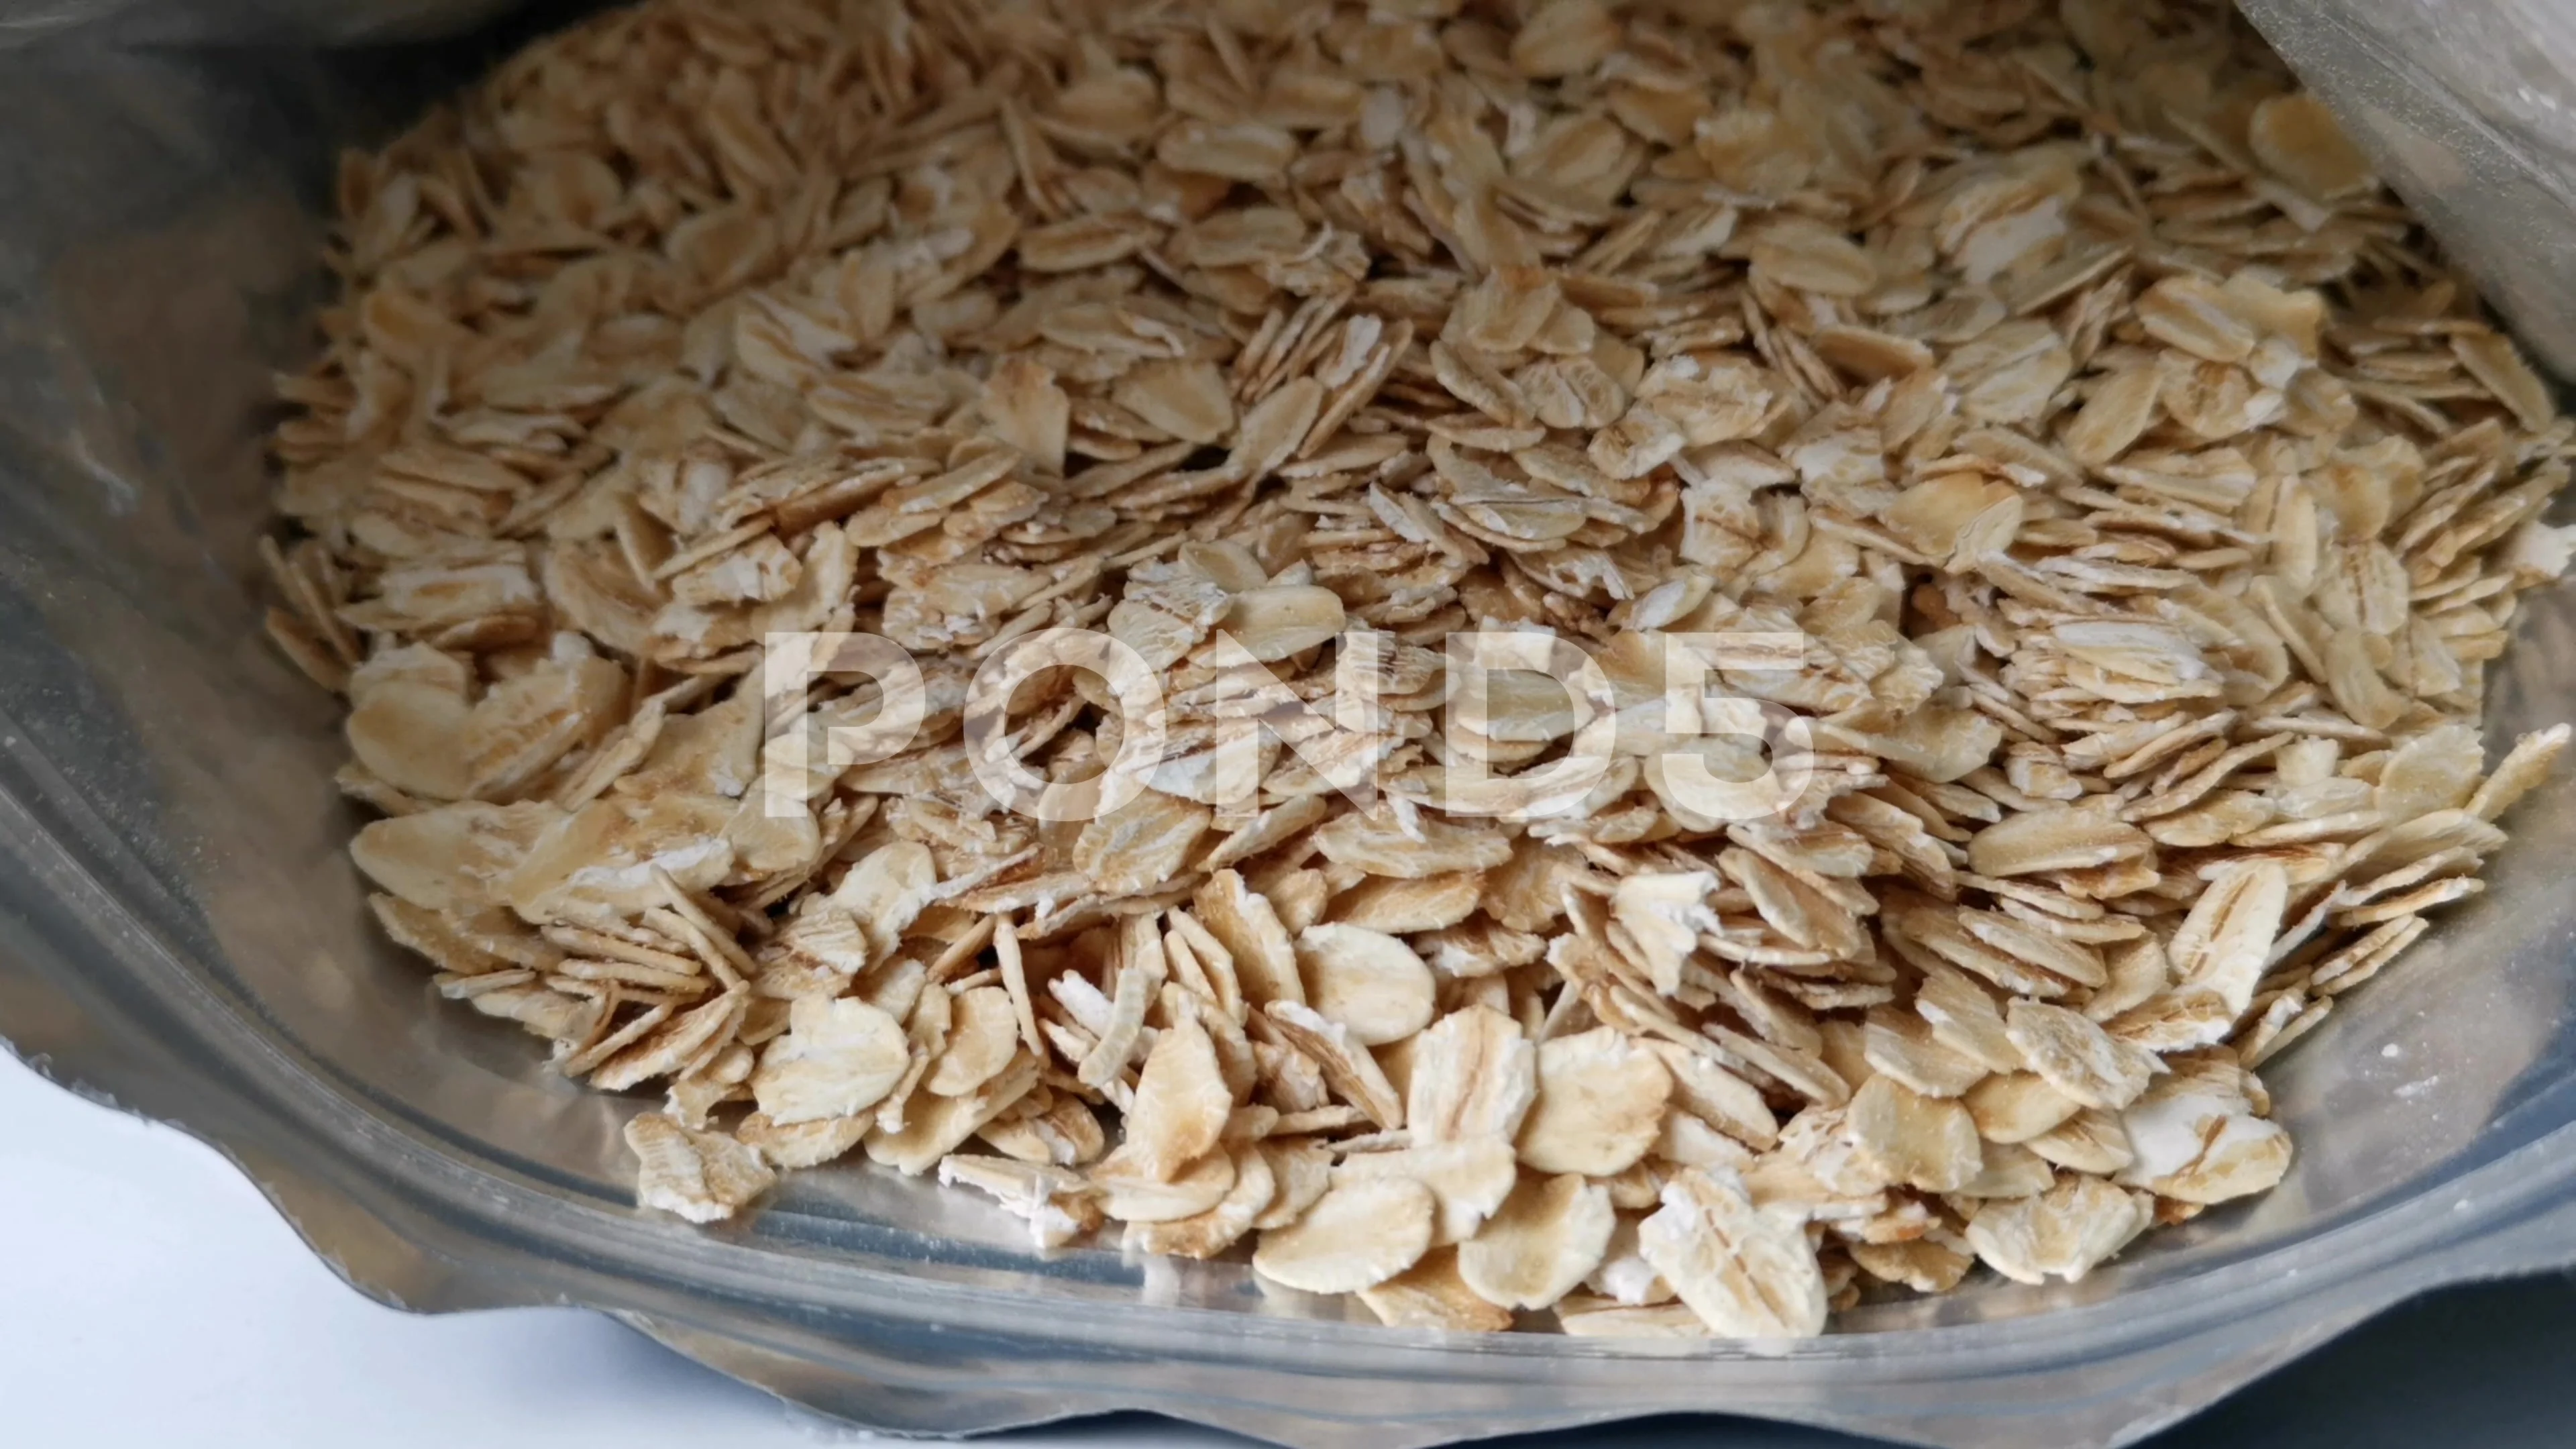 Quaker Whole Grain Rolled Oats Ingredients Biggest Discount ...